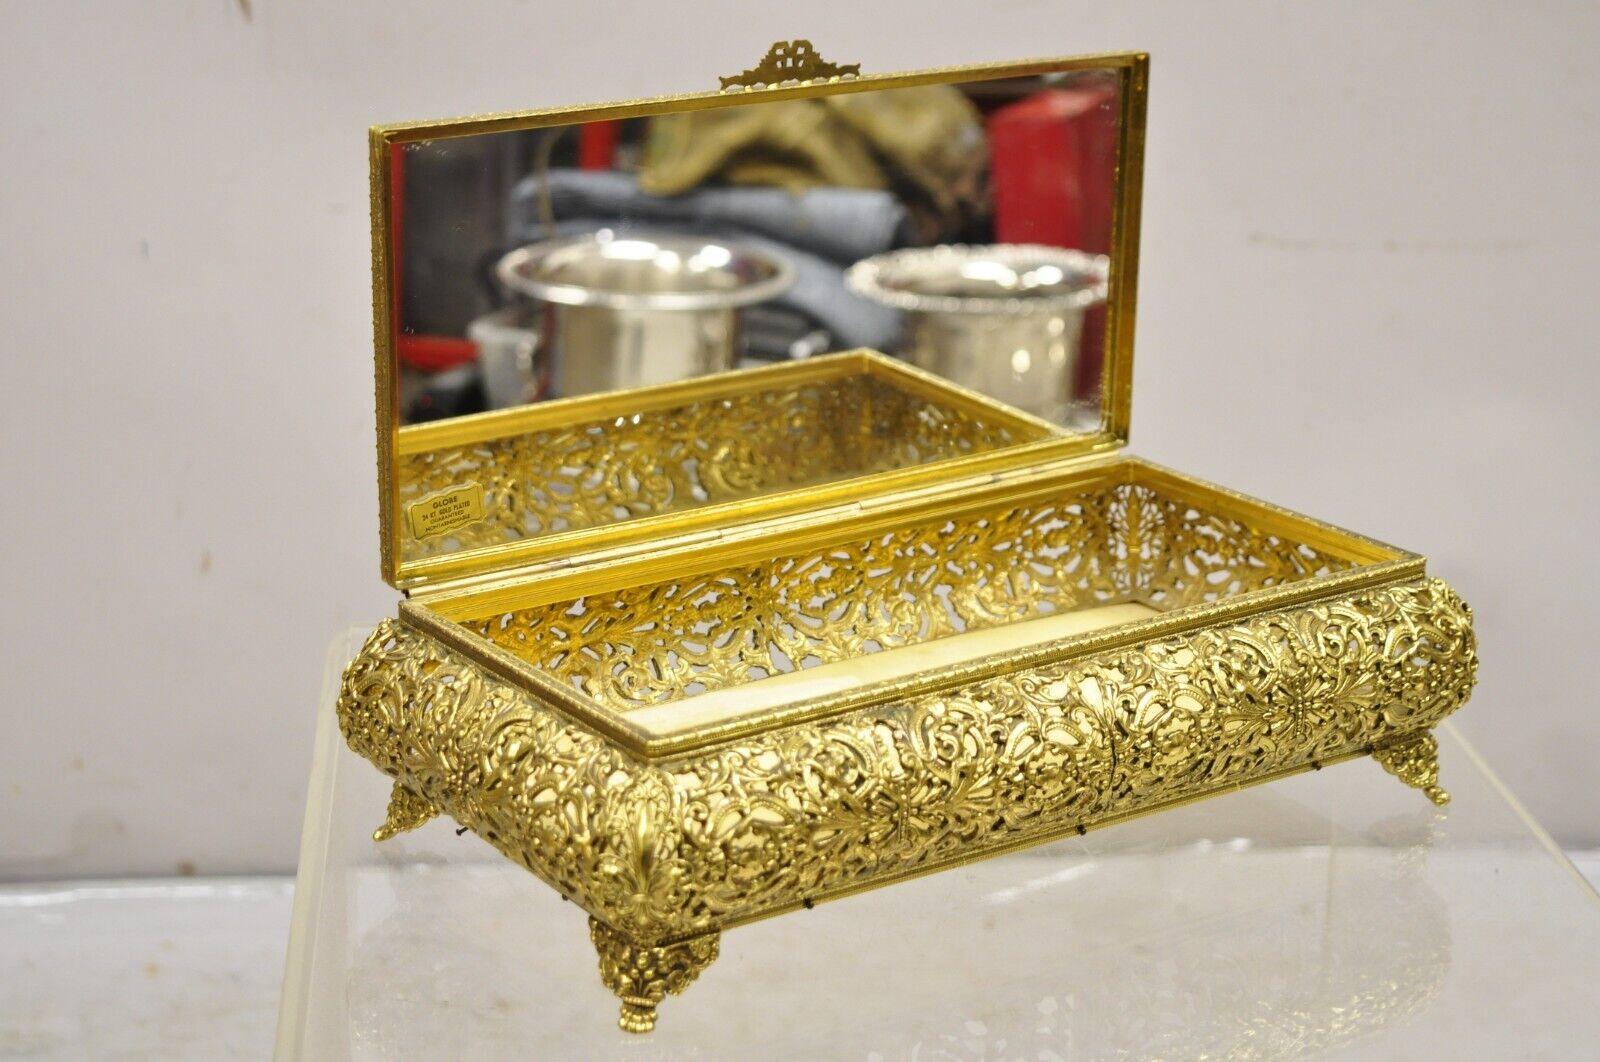 Vintage French Hollywood Regency Style Gold Filigree Vanity Jewelry Box by Globe. Item featured is 24kt gold plated, hinged lid, felt lining, interior mirror, very nice vintage item. Circa Mid to Late 20th Century. Measurements: 4